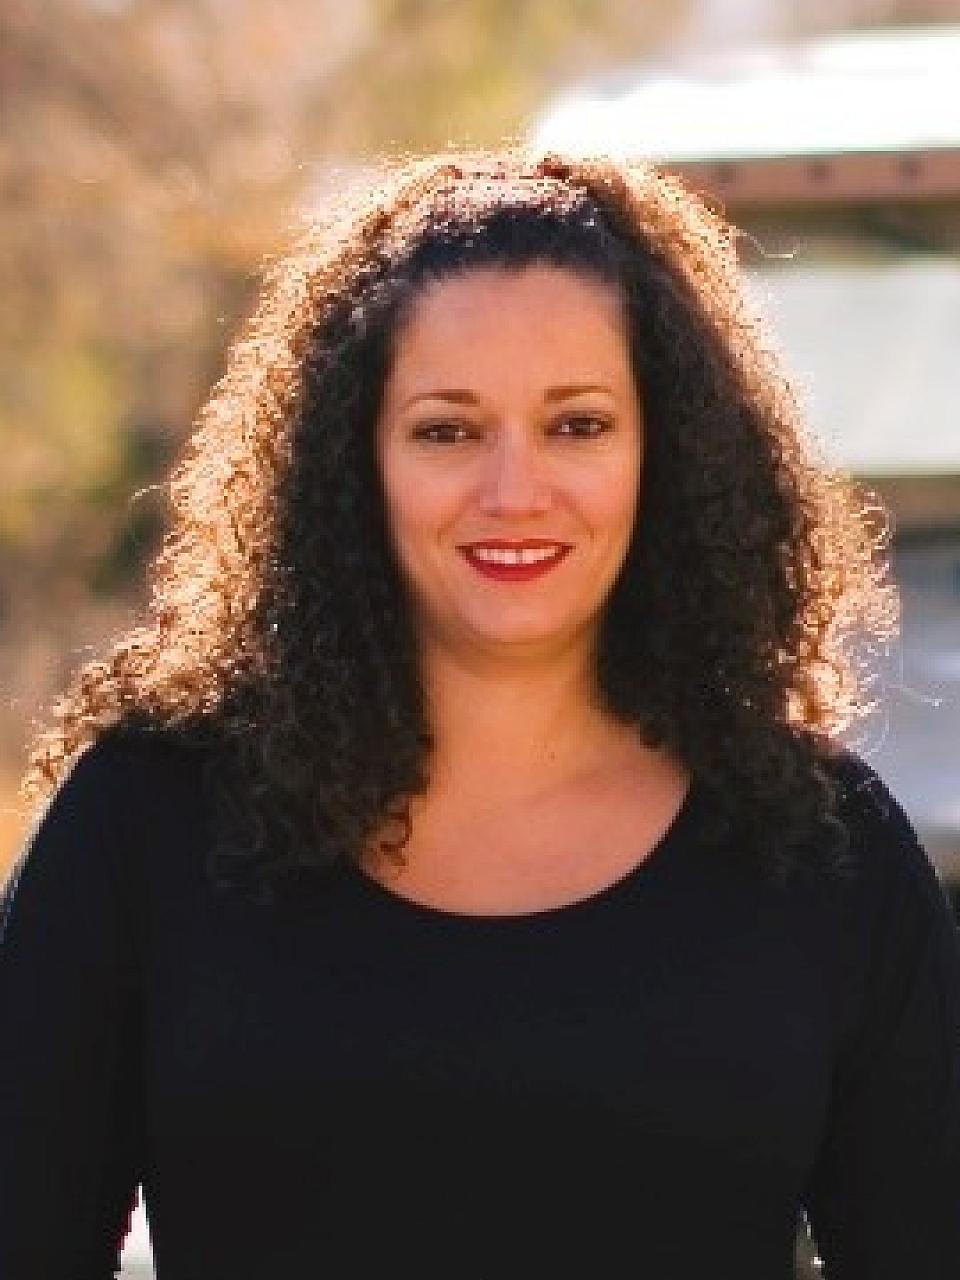 Women with dark curly hair and a black t-shirt